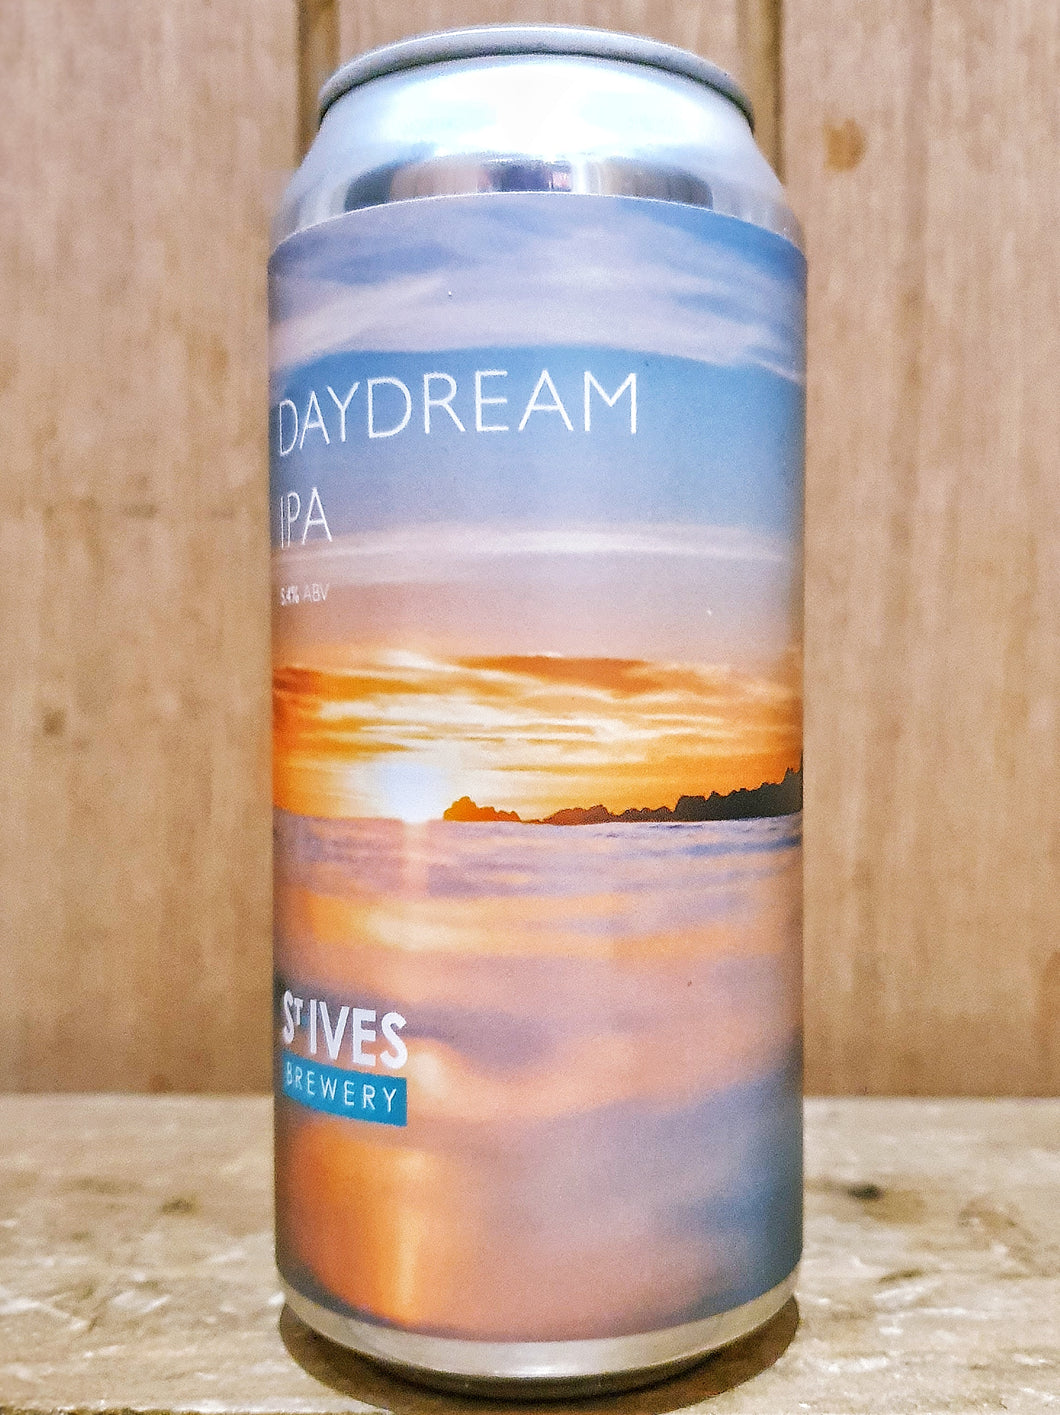 St Ives Brewery - Daydream